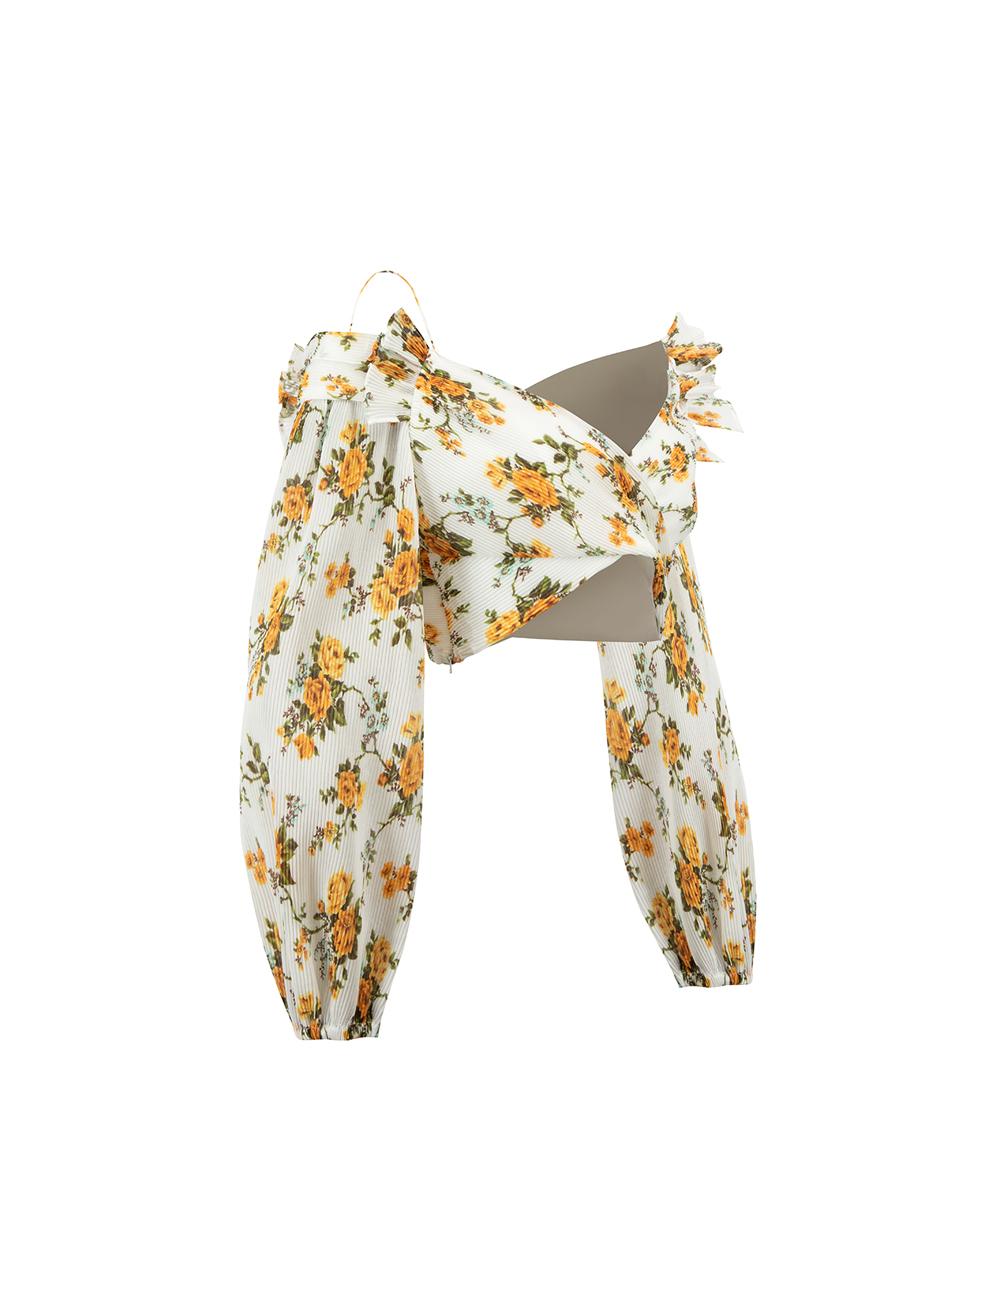 CONDITION is Very good. Hardly any visible wear to top is evident on this used Zimmermann designer resale item. 



Details


White and yellow

Polyester

Cropped top

Floral print pattern

Pleated accent

V neckline

Asymmetric detail with